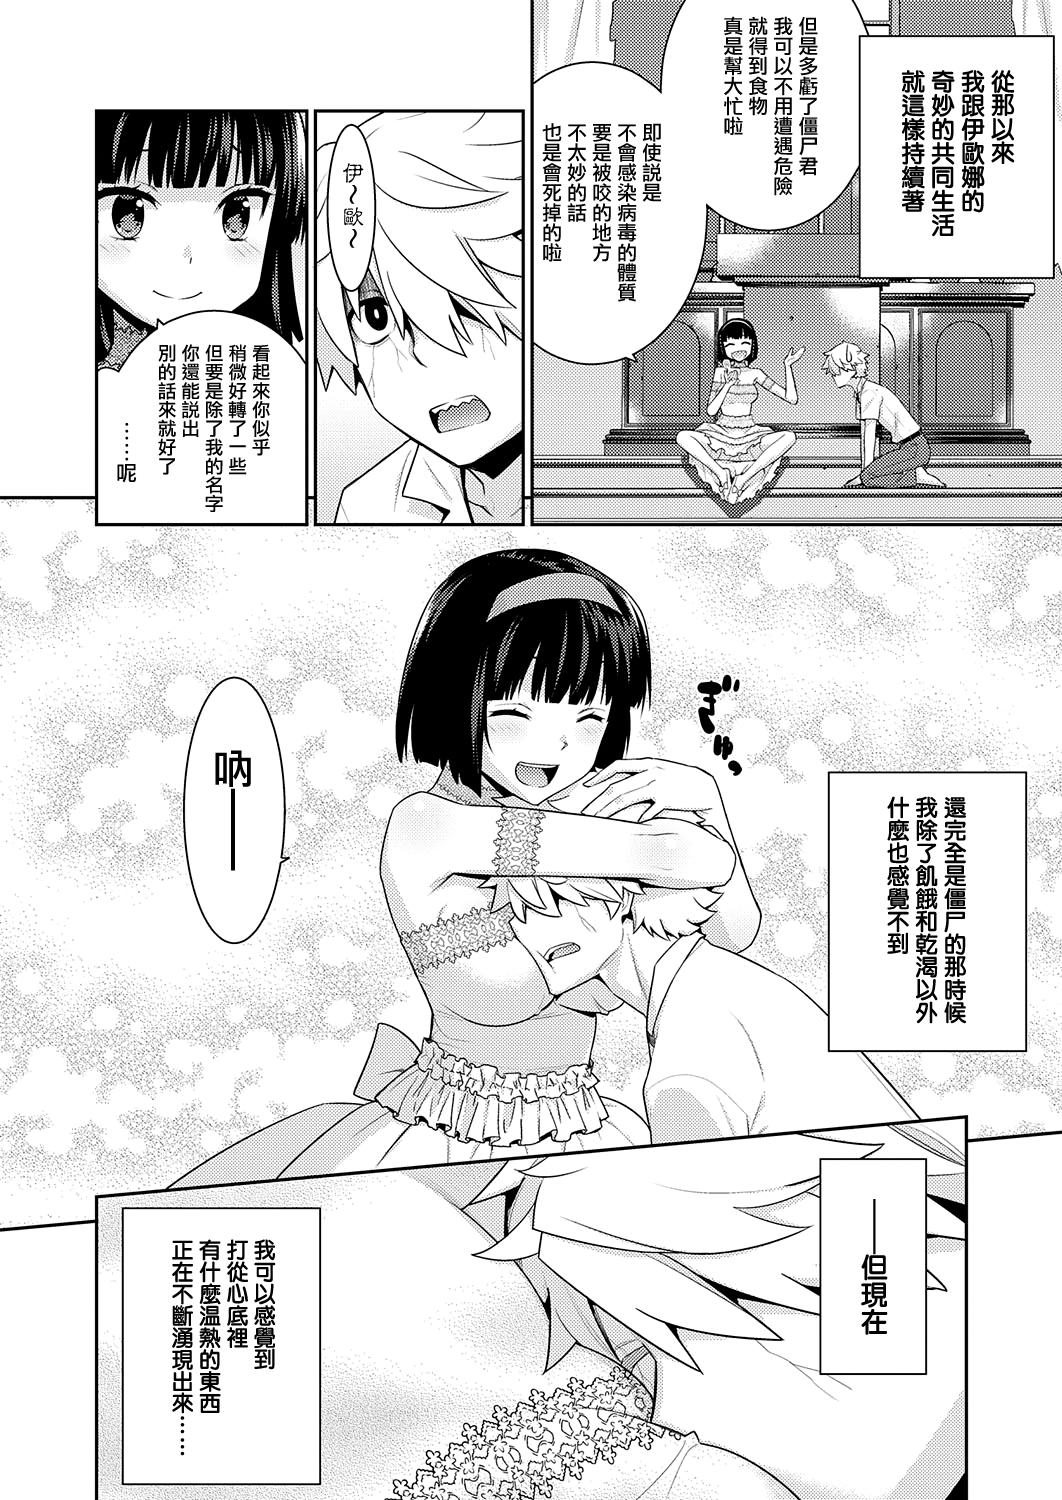 Best Blowjob Ever Zombie no Hanayome - bride of zombie Indian Sex - Page 6